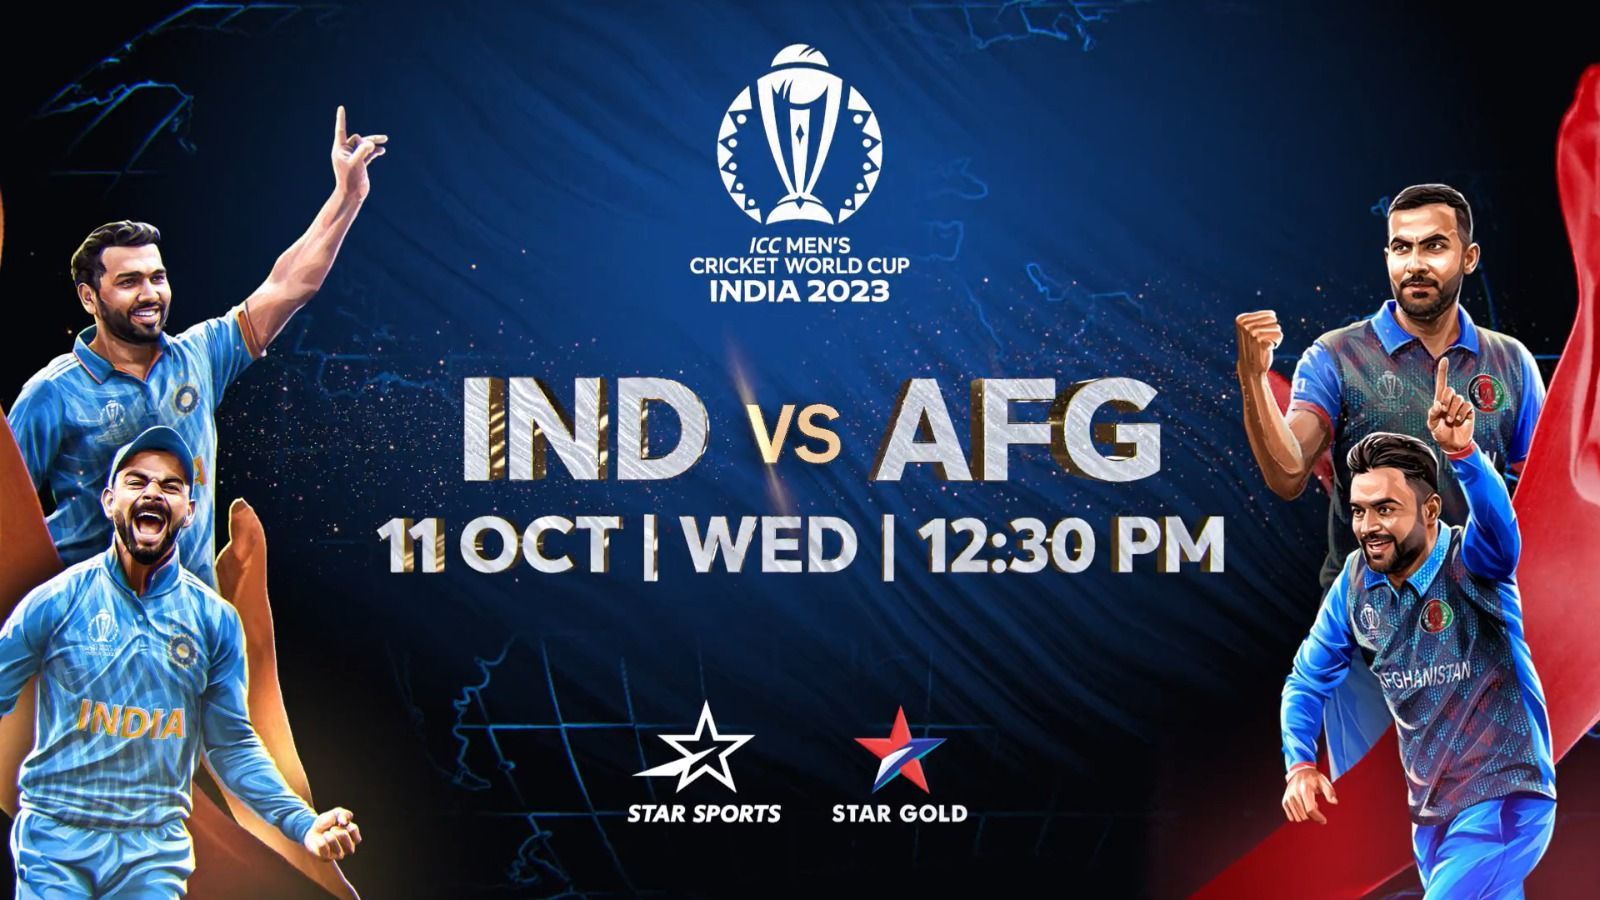 India vs Afghanistan 2023 World Cup match will be played in Delhi on Wednesday.